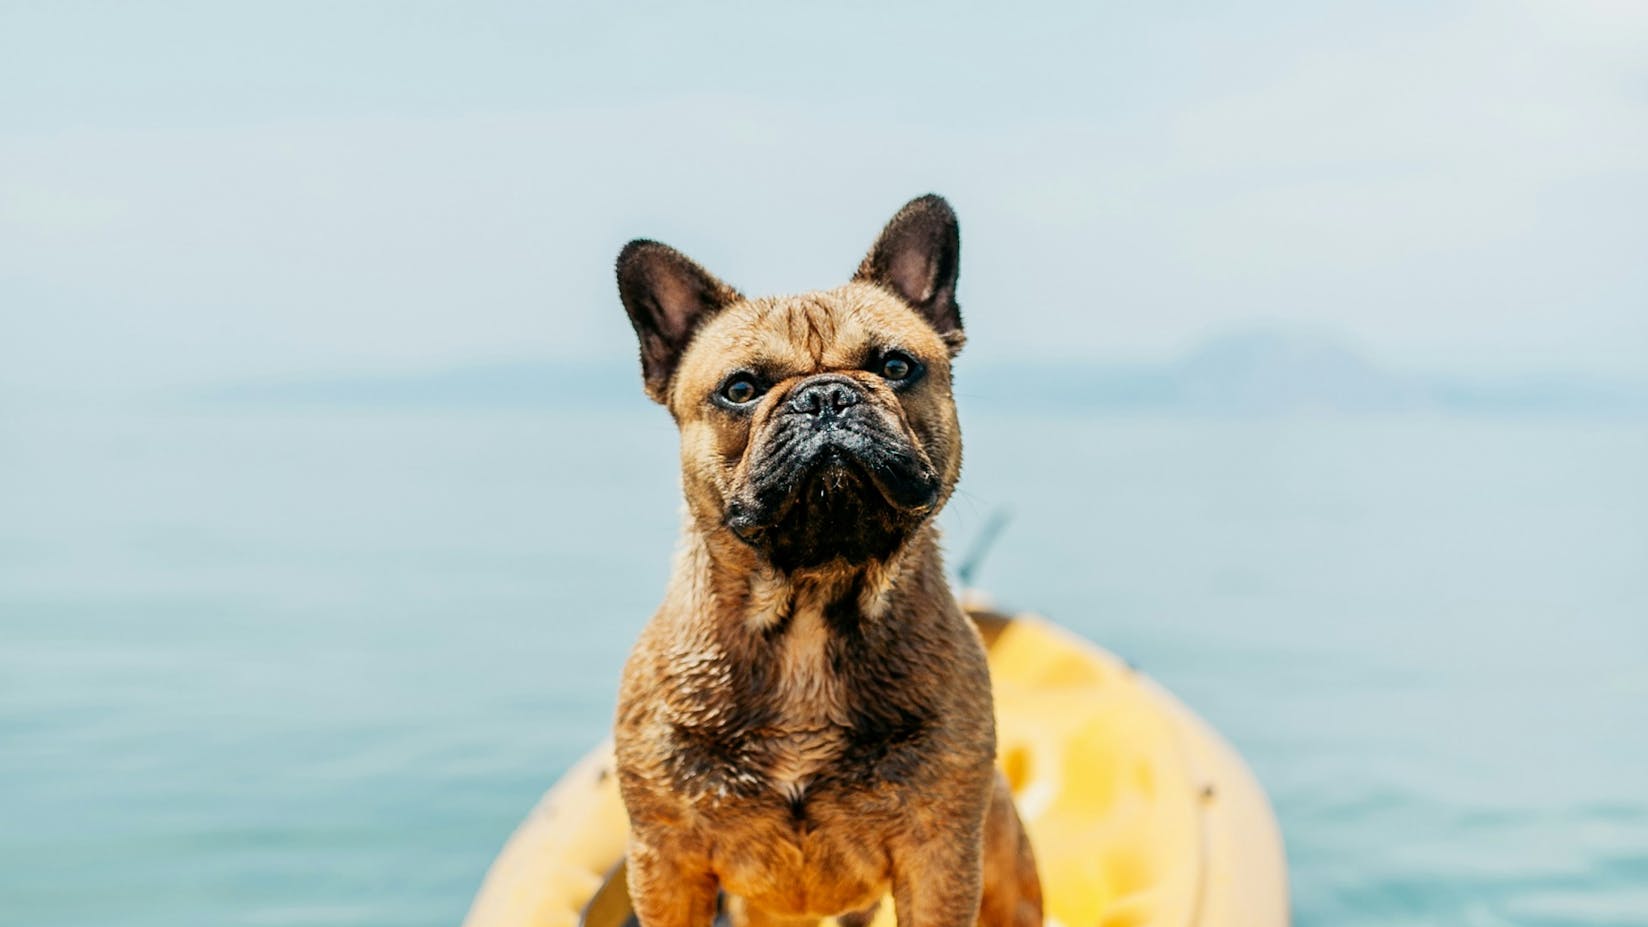 Frenchie riding a yellow surf board.